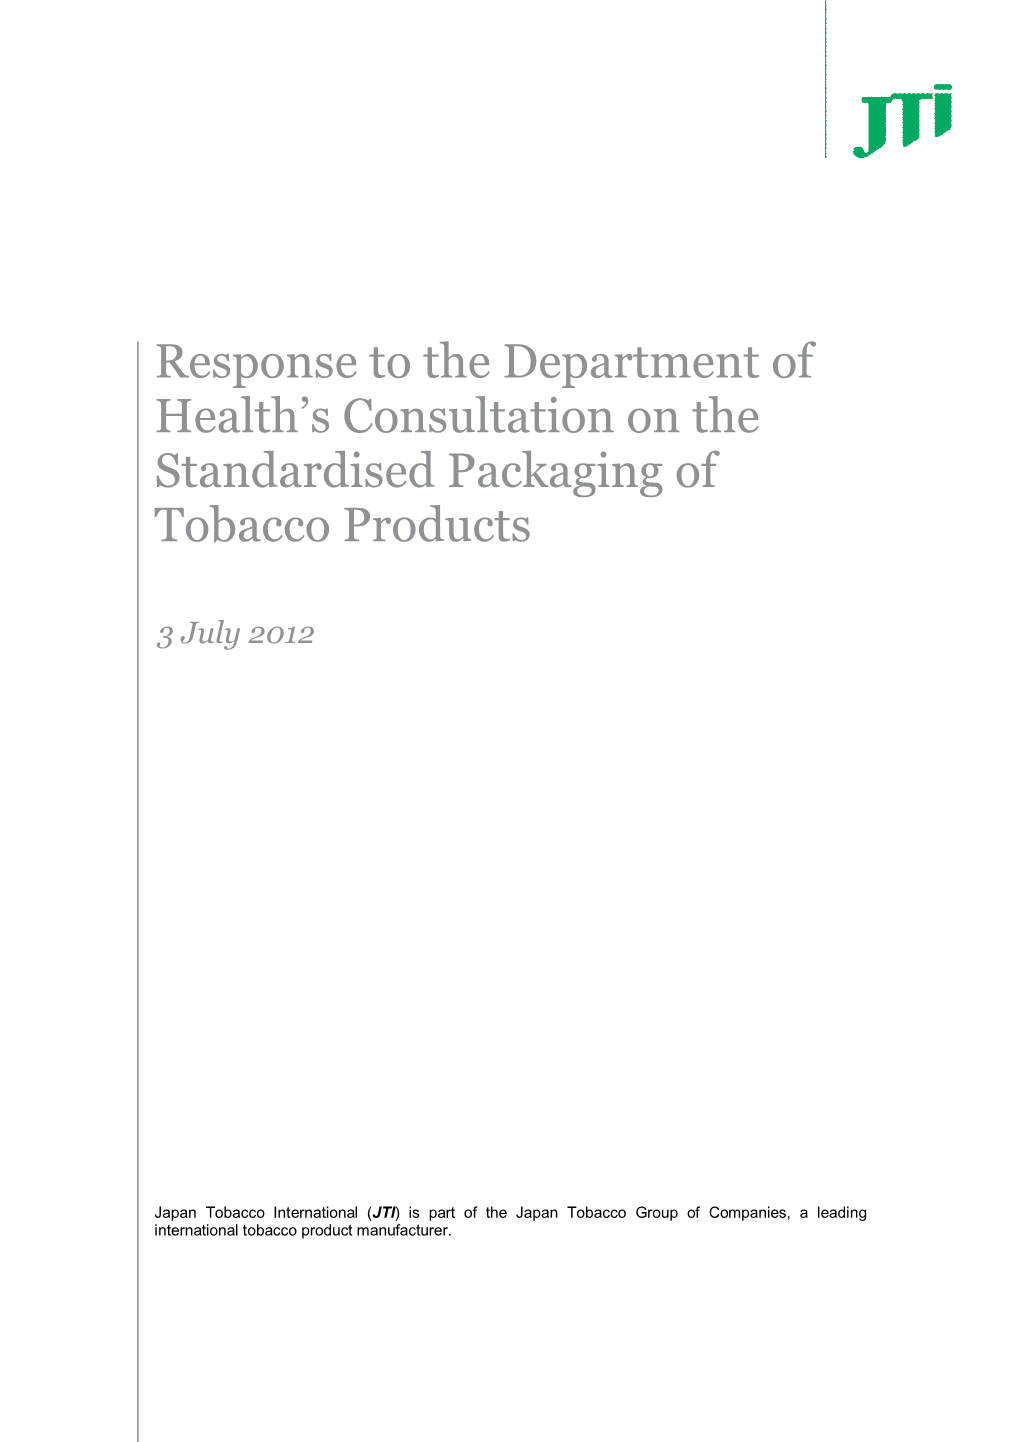 Response to the Department of Health's Consultation on The